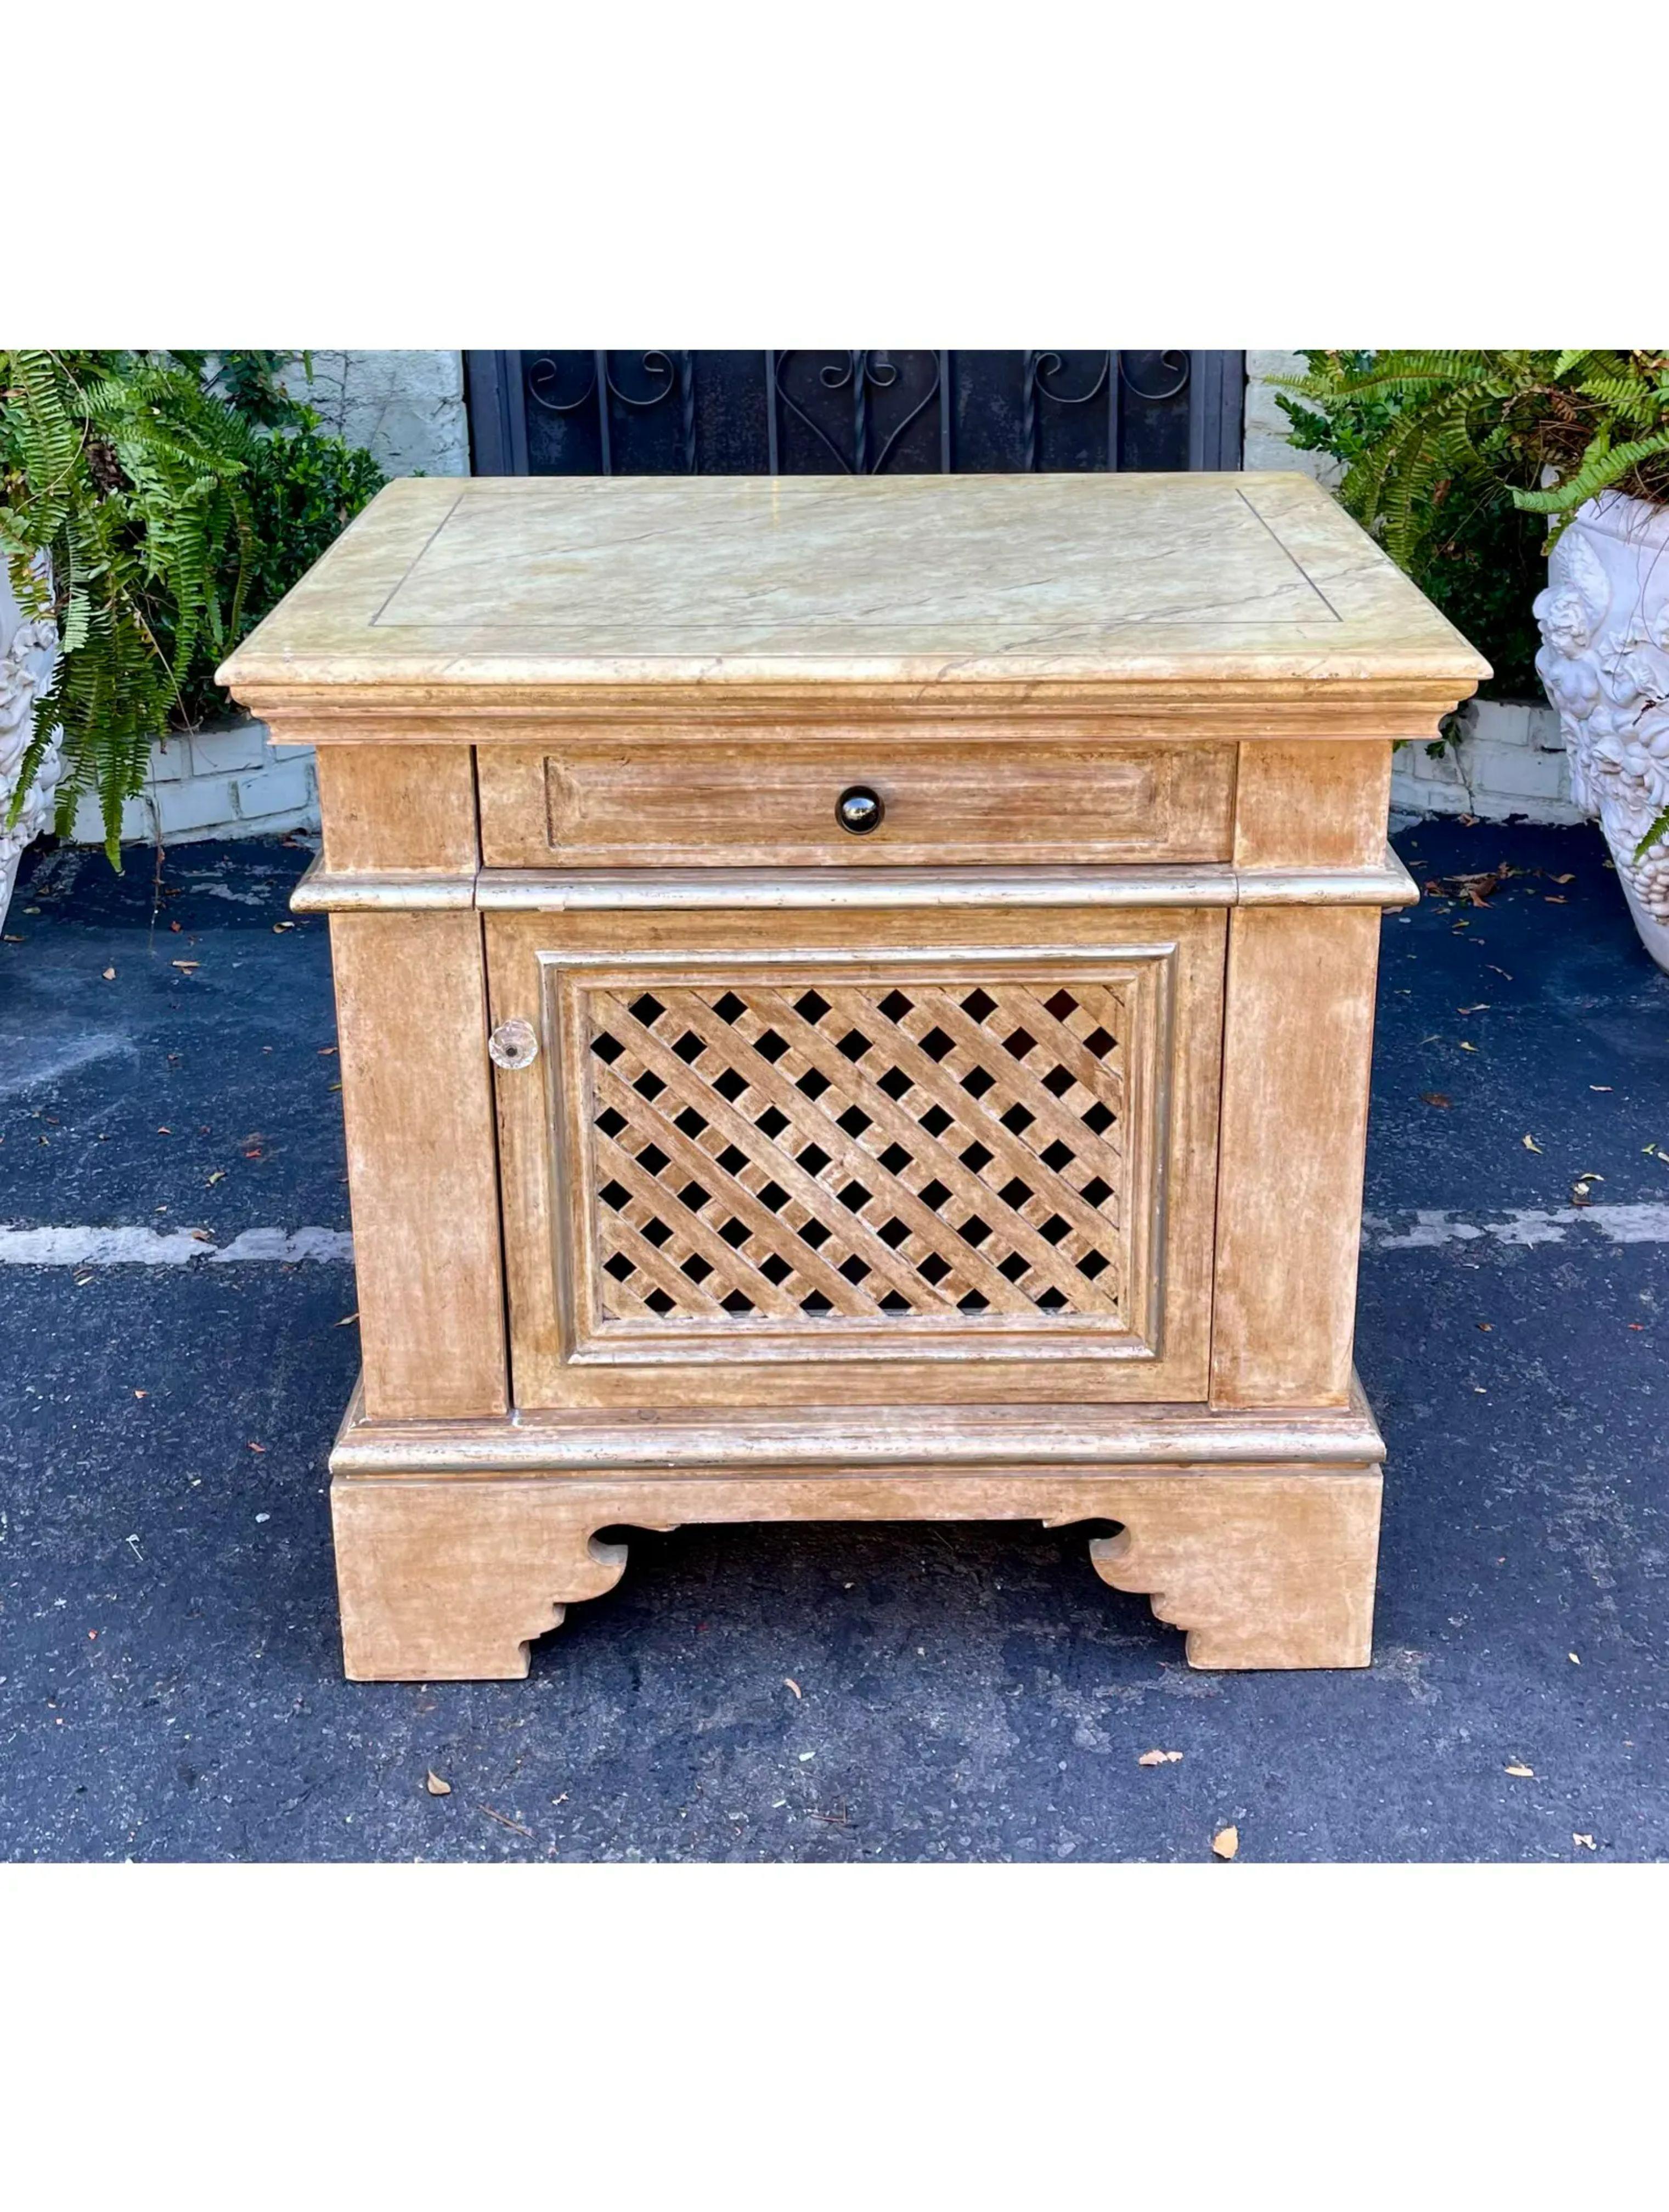 Minton-Spidell Italian Country Tuscany Style Side Table Nightstand Cabinet 1